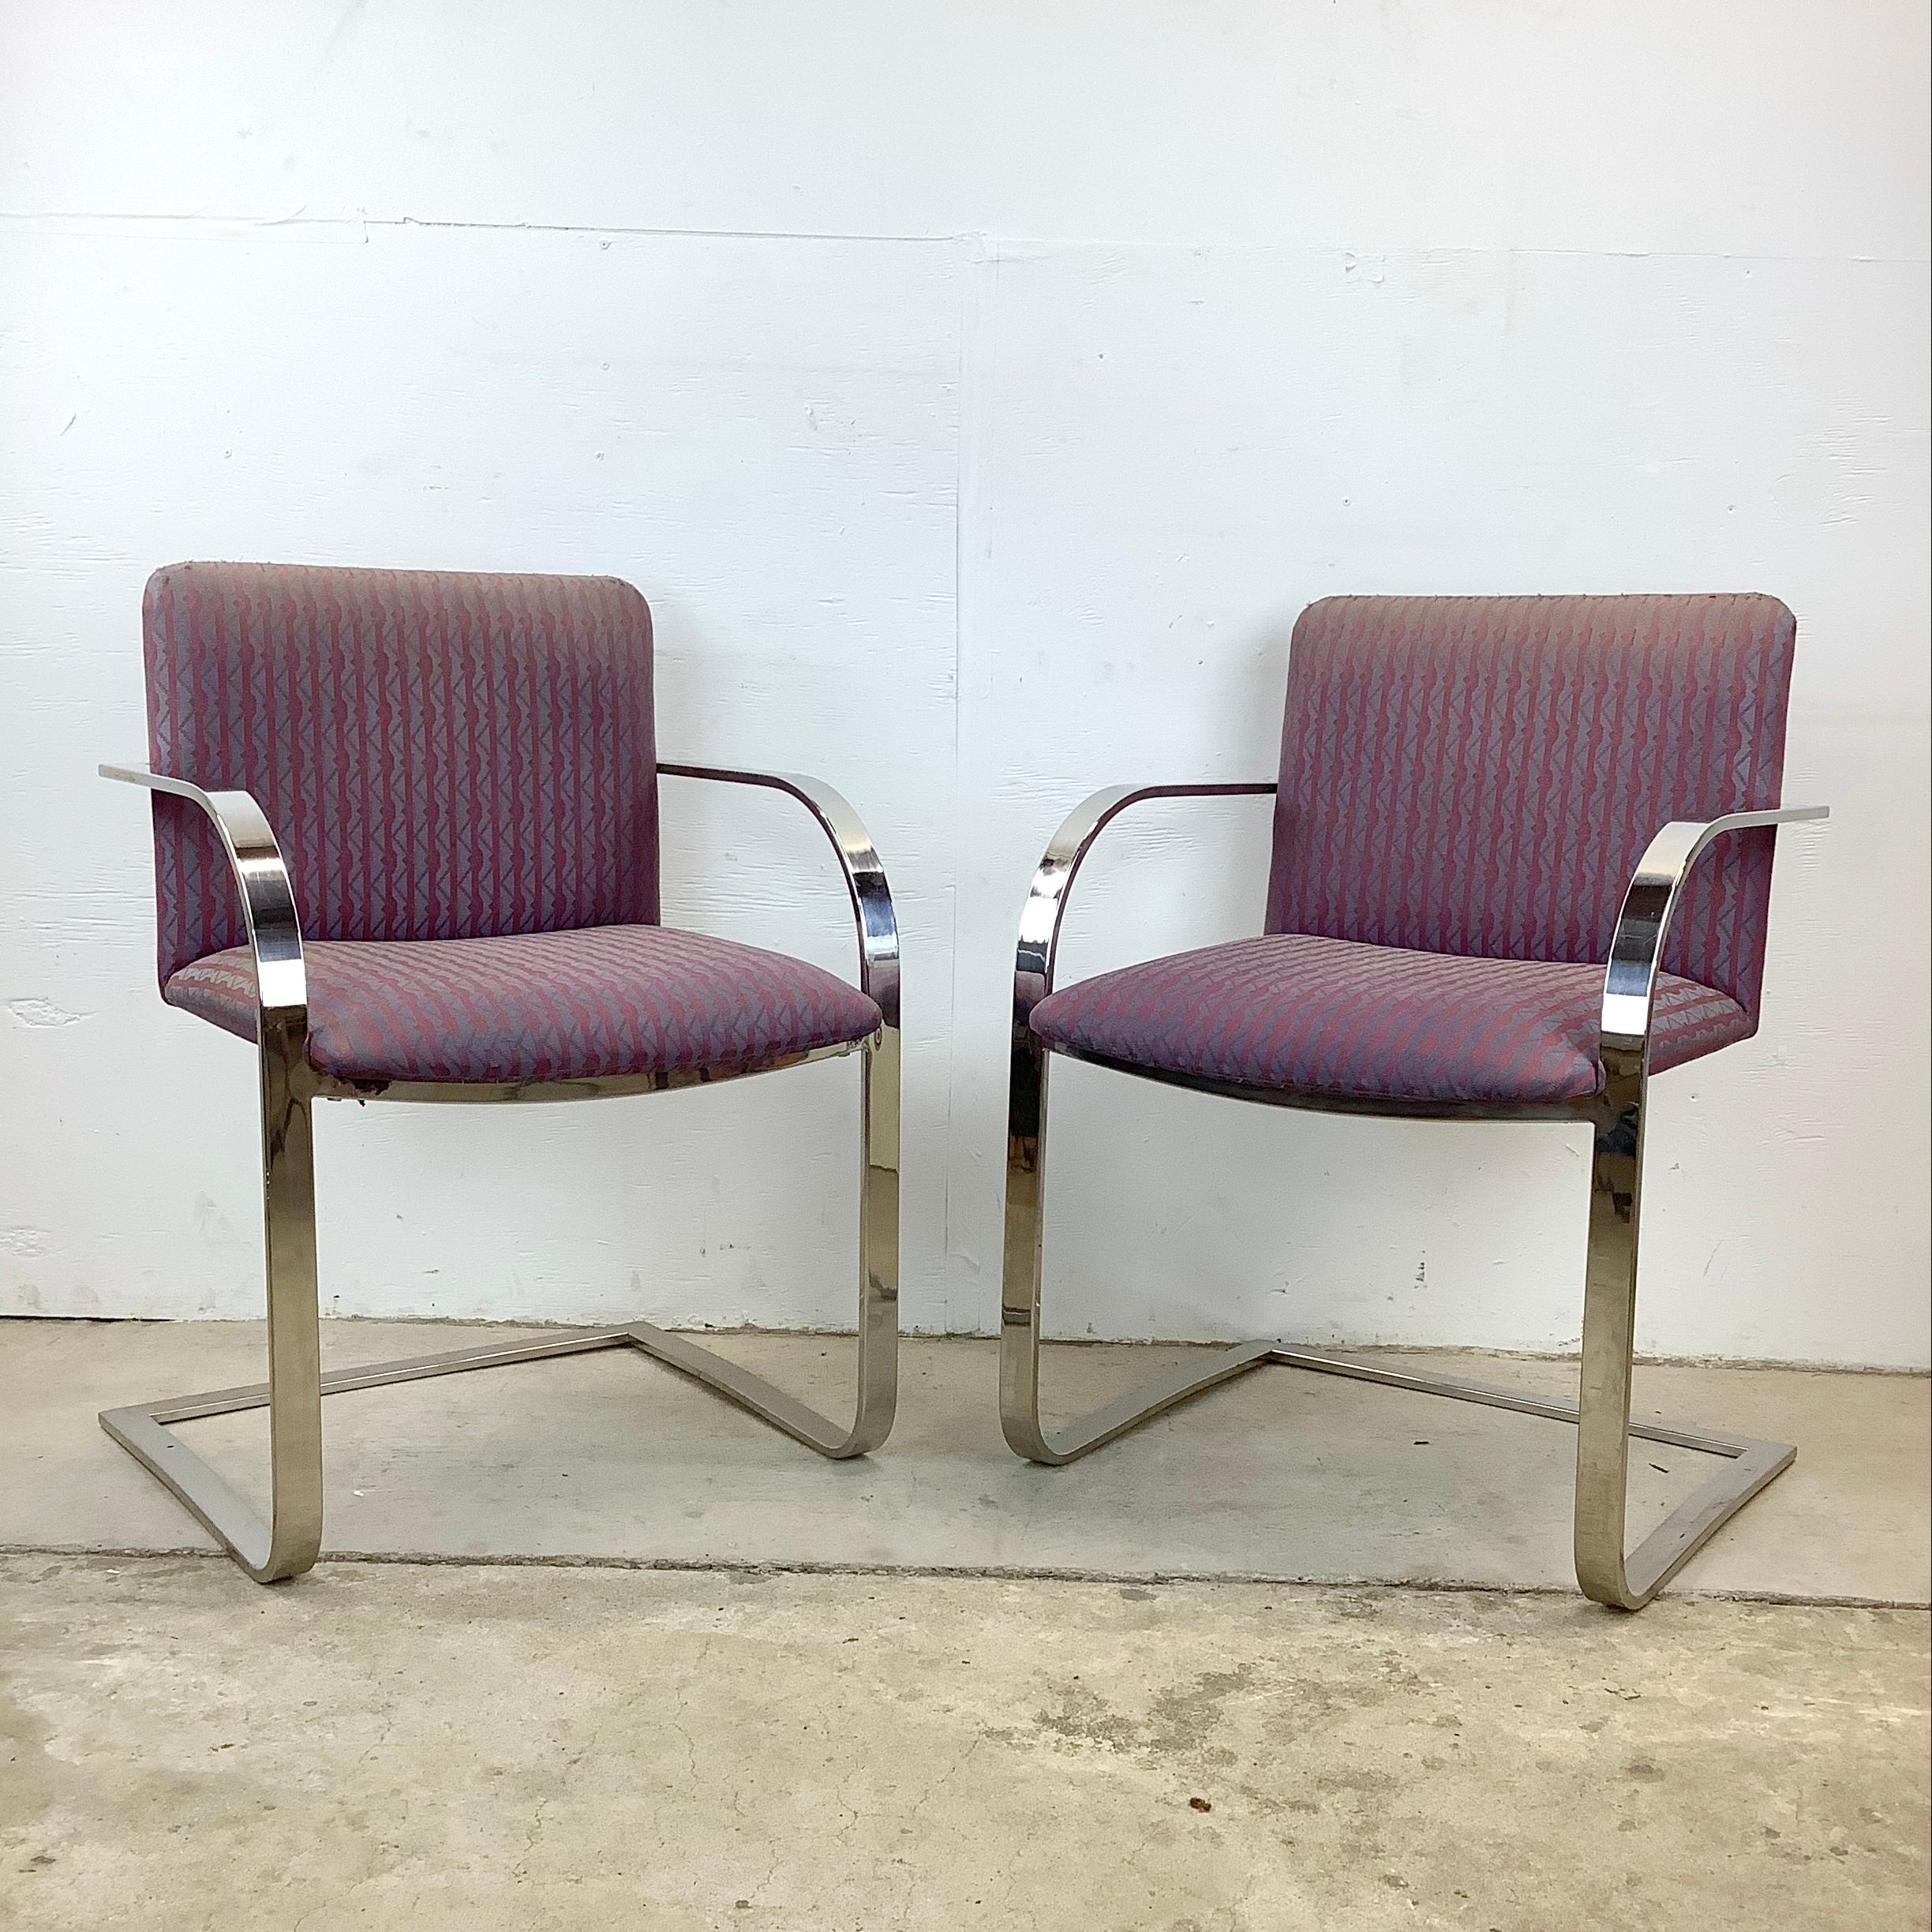 This matching pair of Vintage Brno Style Flat Bar Side Chairs are designed with a nod to the legendary Mies van der Rohe. These comfortable and striking chairs embody the minimalist ethos of the Bauhaus and Mid-Century styles. Each chair has been